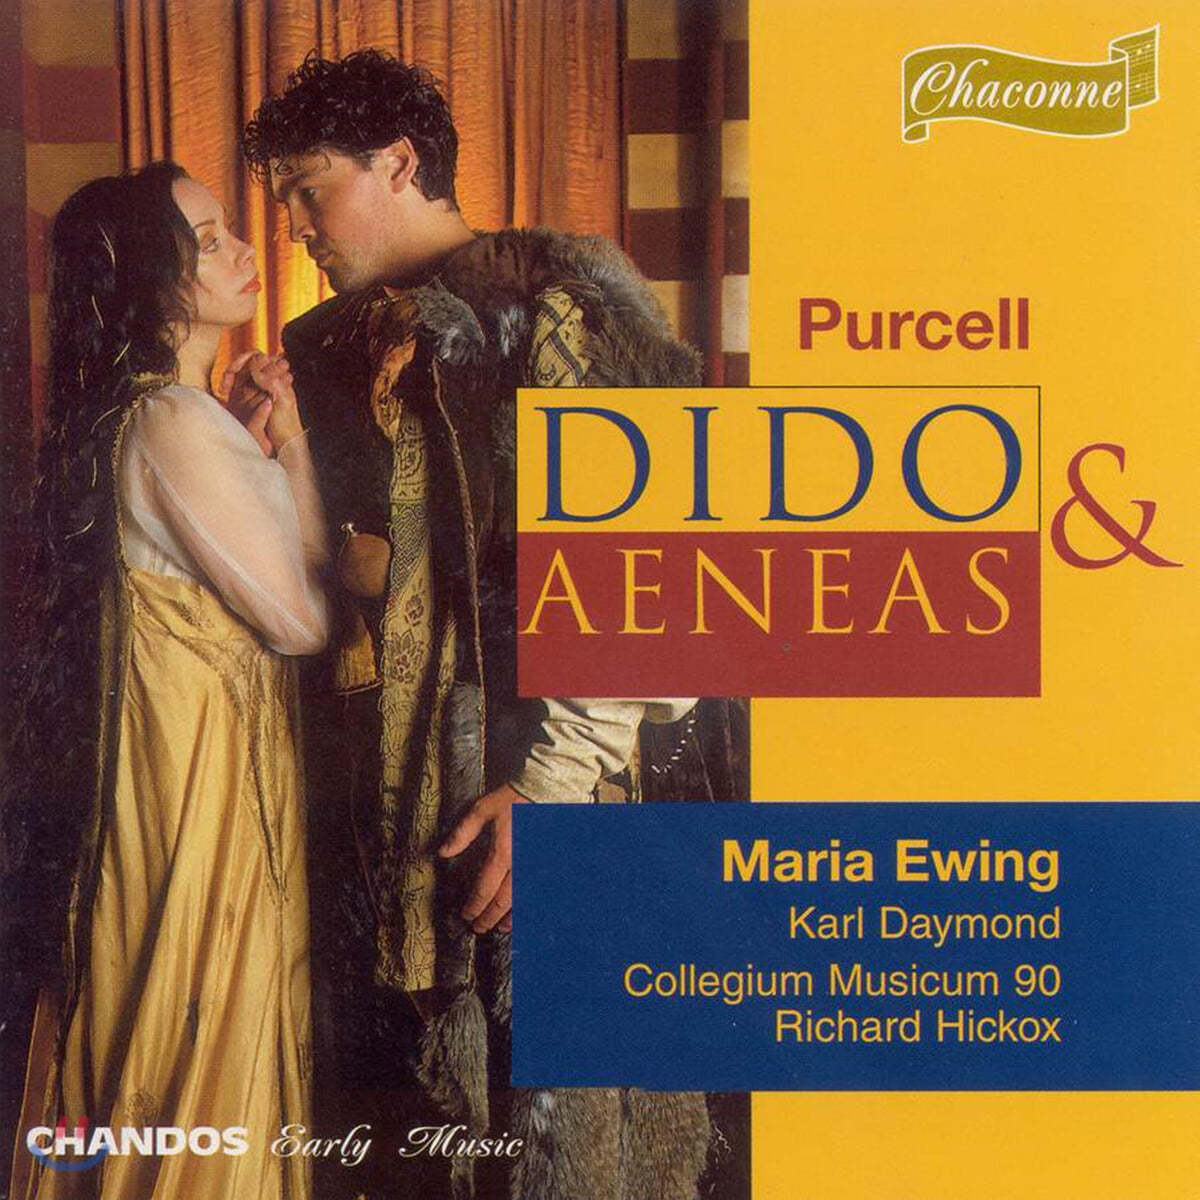 Richard Hickox 퍼셀: 디도와 에네아스 (Purcell: Dido and Aeneas)